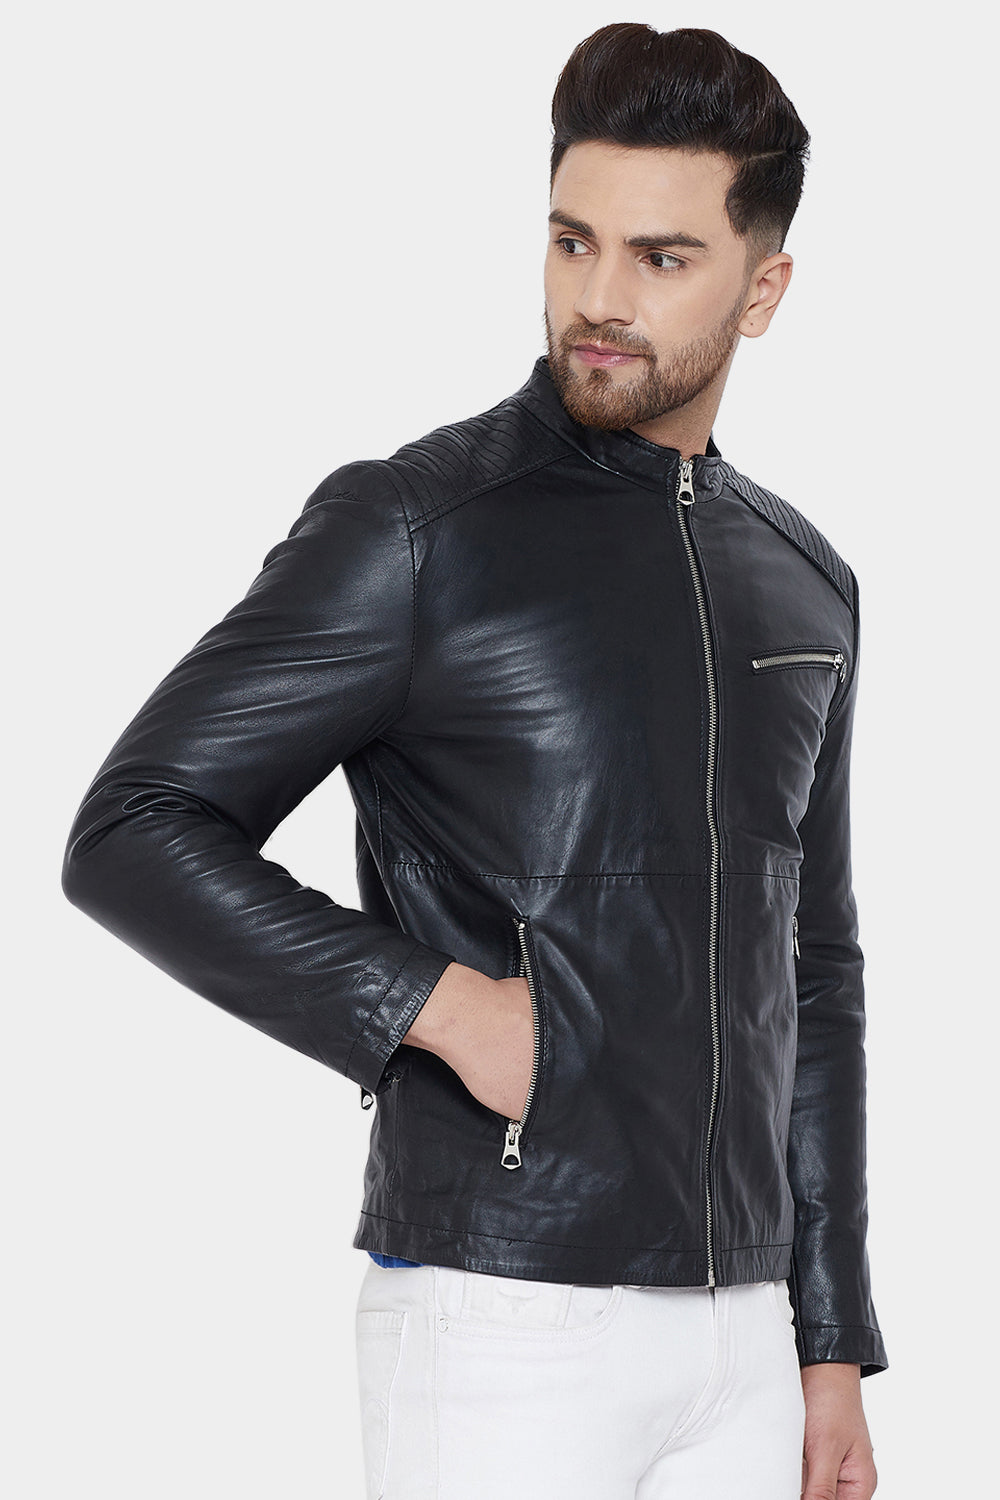 JUSTANNED ZIP UP COLLAR REAL LEATHER BLACK JACKET – Justanned